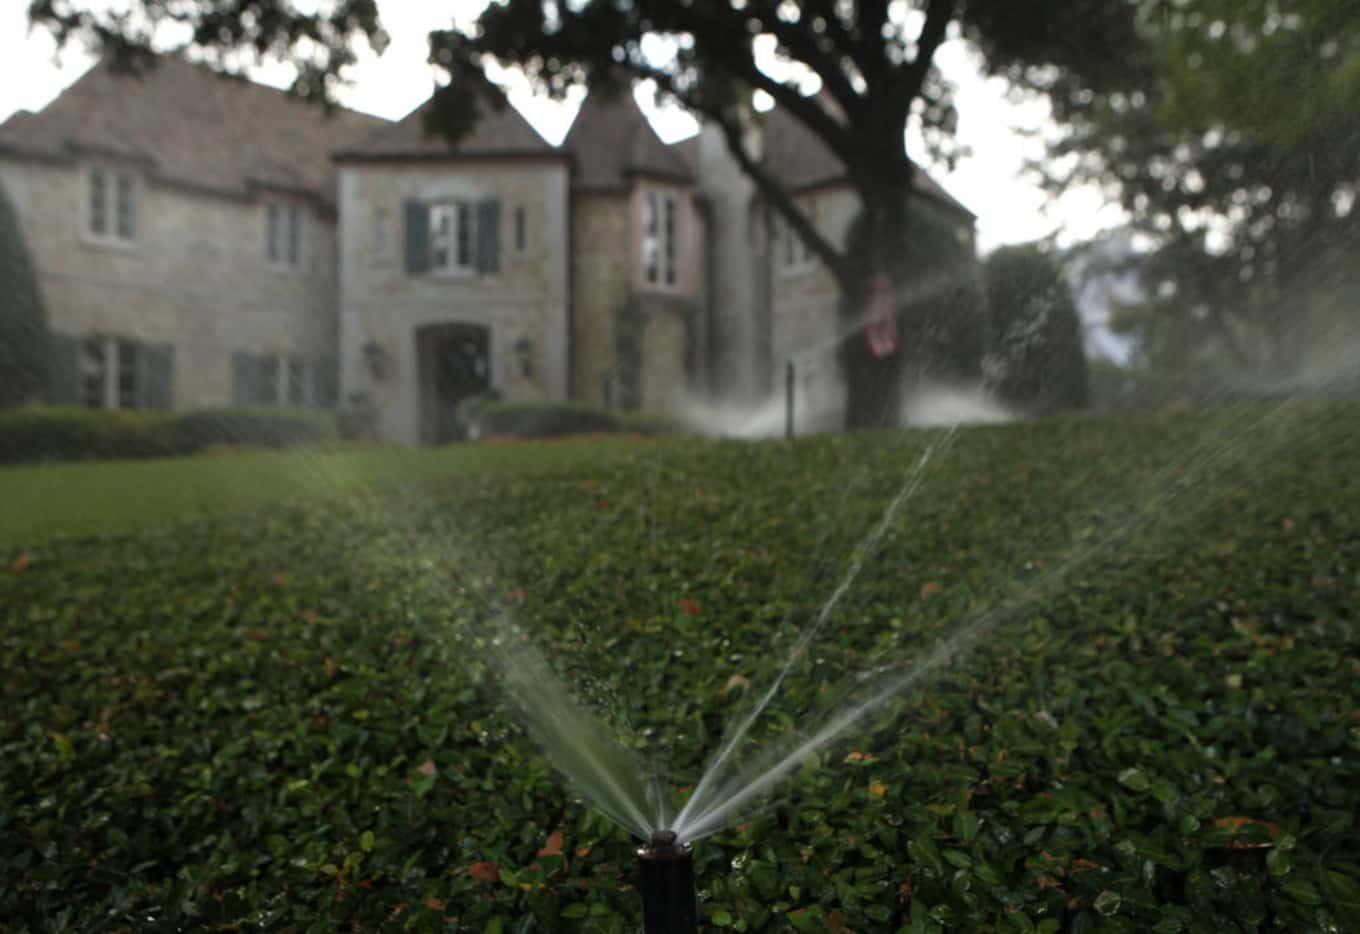 Sprinklers water the foliage in front of a house in the 3900 block of Euclid Ave. in...